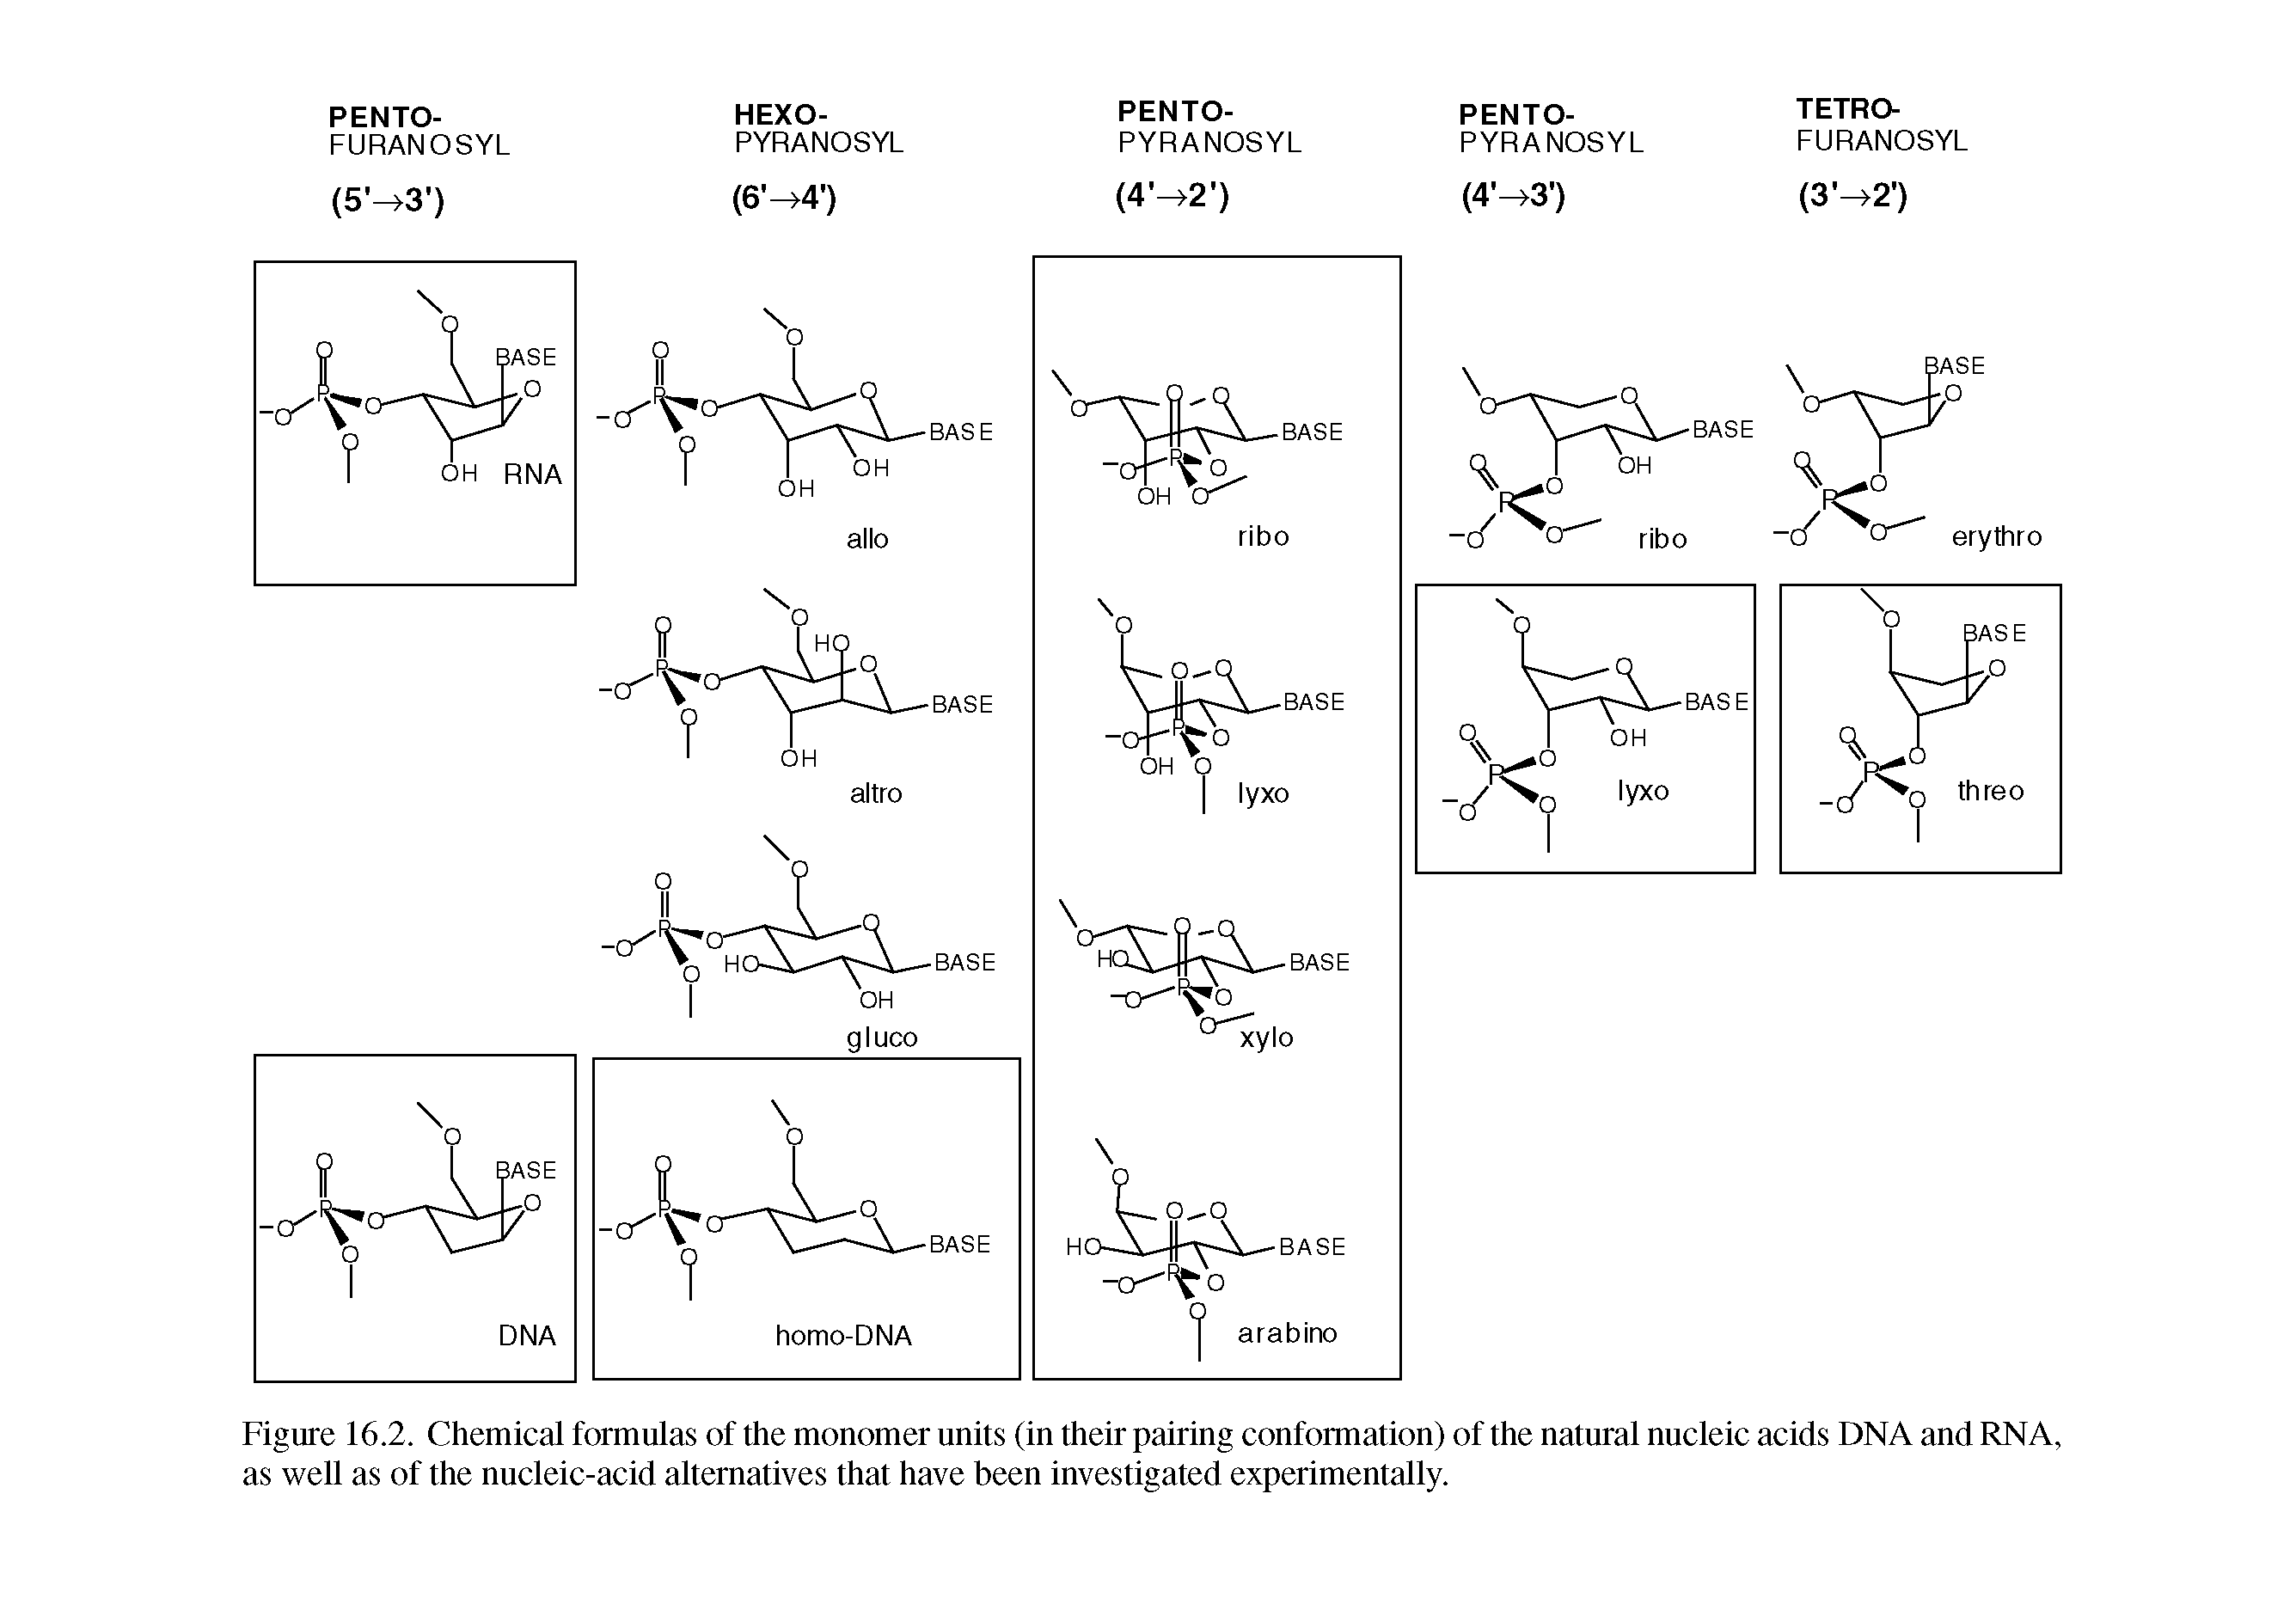 Figure 16.2. Chemical formulas of the monomer units (in their pairing conformation) of the natural nucleic acids DNA and RNA, as well as of the nucleic-acid alternatives that have been investigated experimentally.